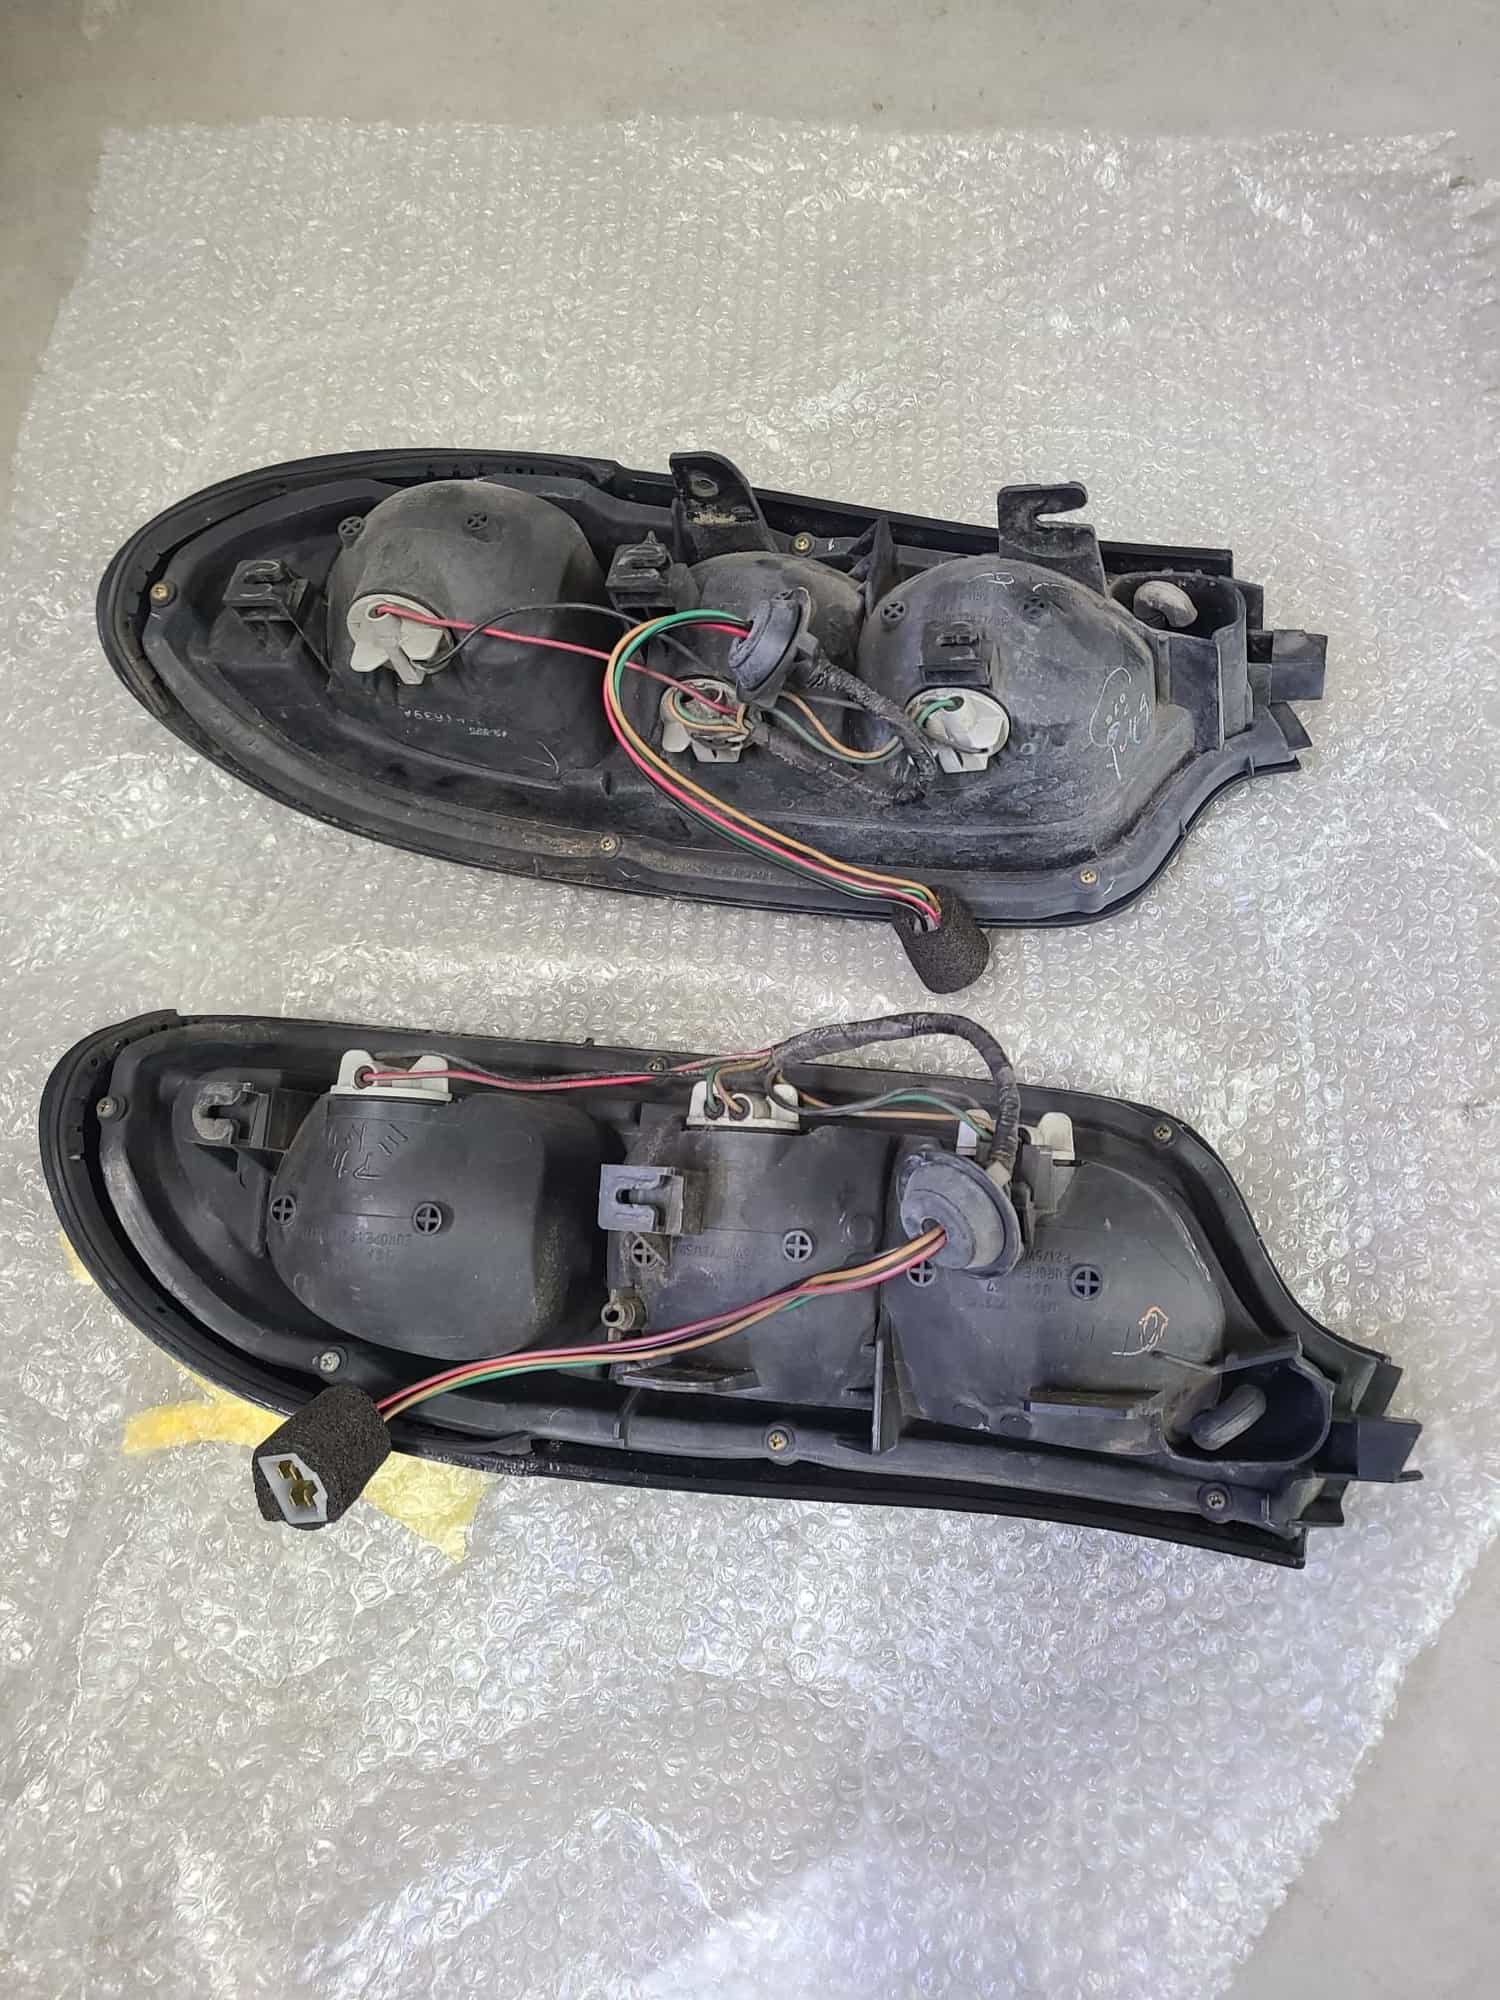 Miscellaneous - 99 Tail Lights $850 - Used - 1999 to 2002 Mazda RX-7 - Richmond Hill, ON L4E3Y6, Canada